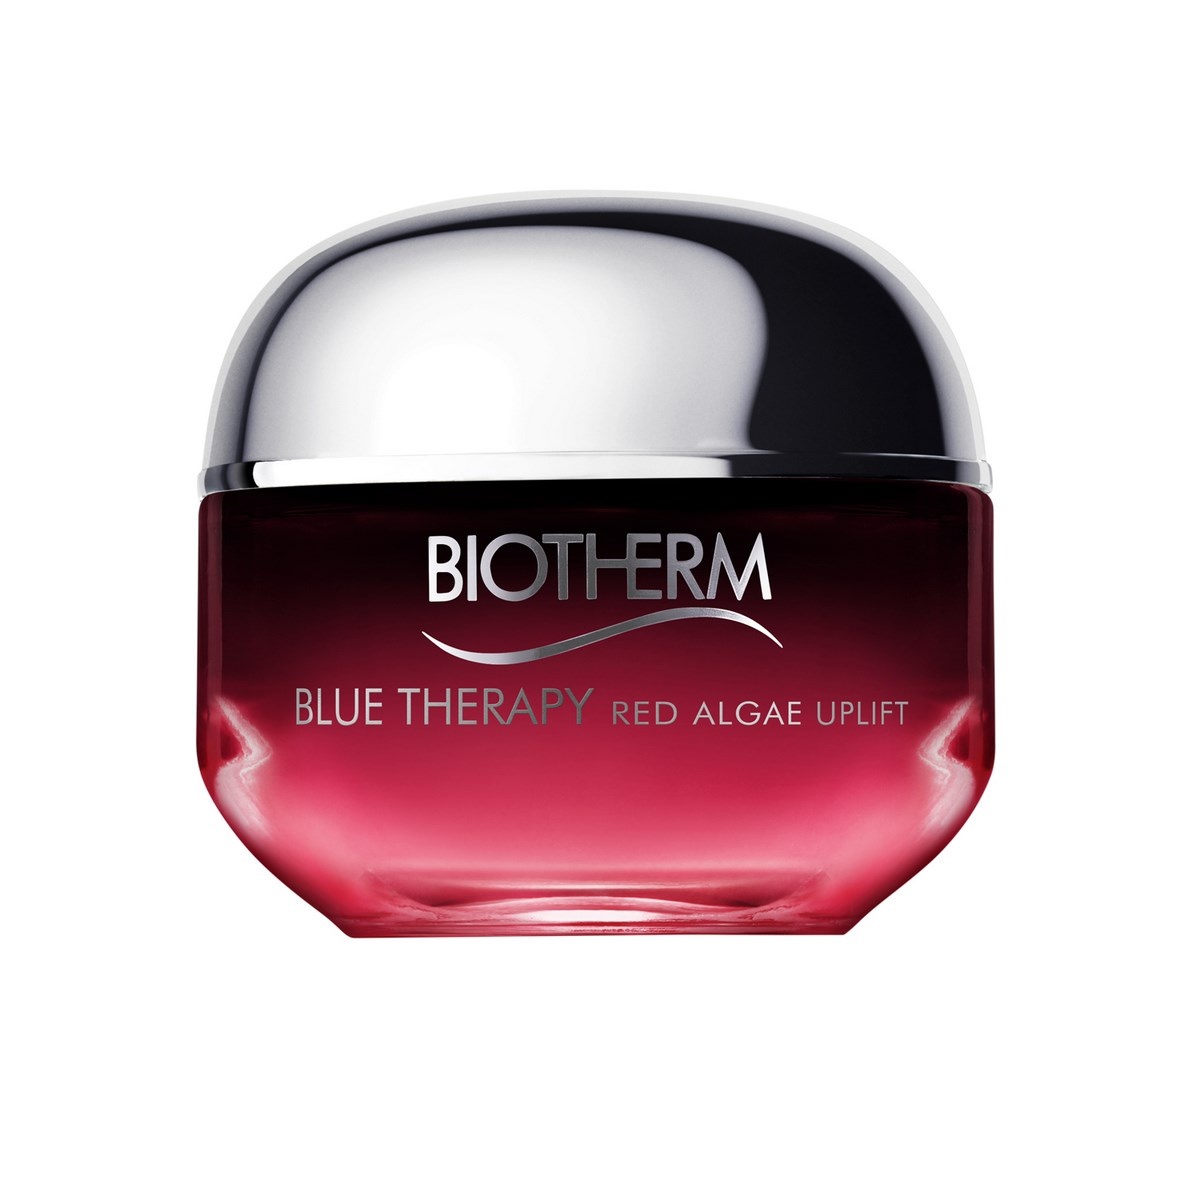  Blue Therapy Red Algae Uplift Daycreme